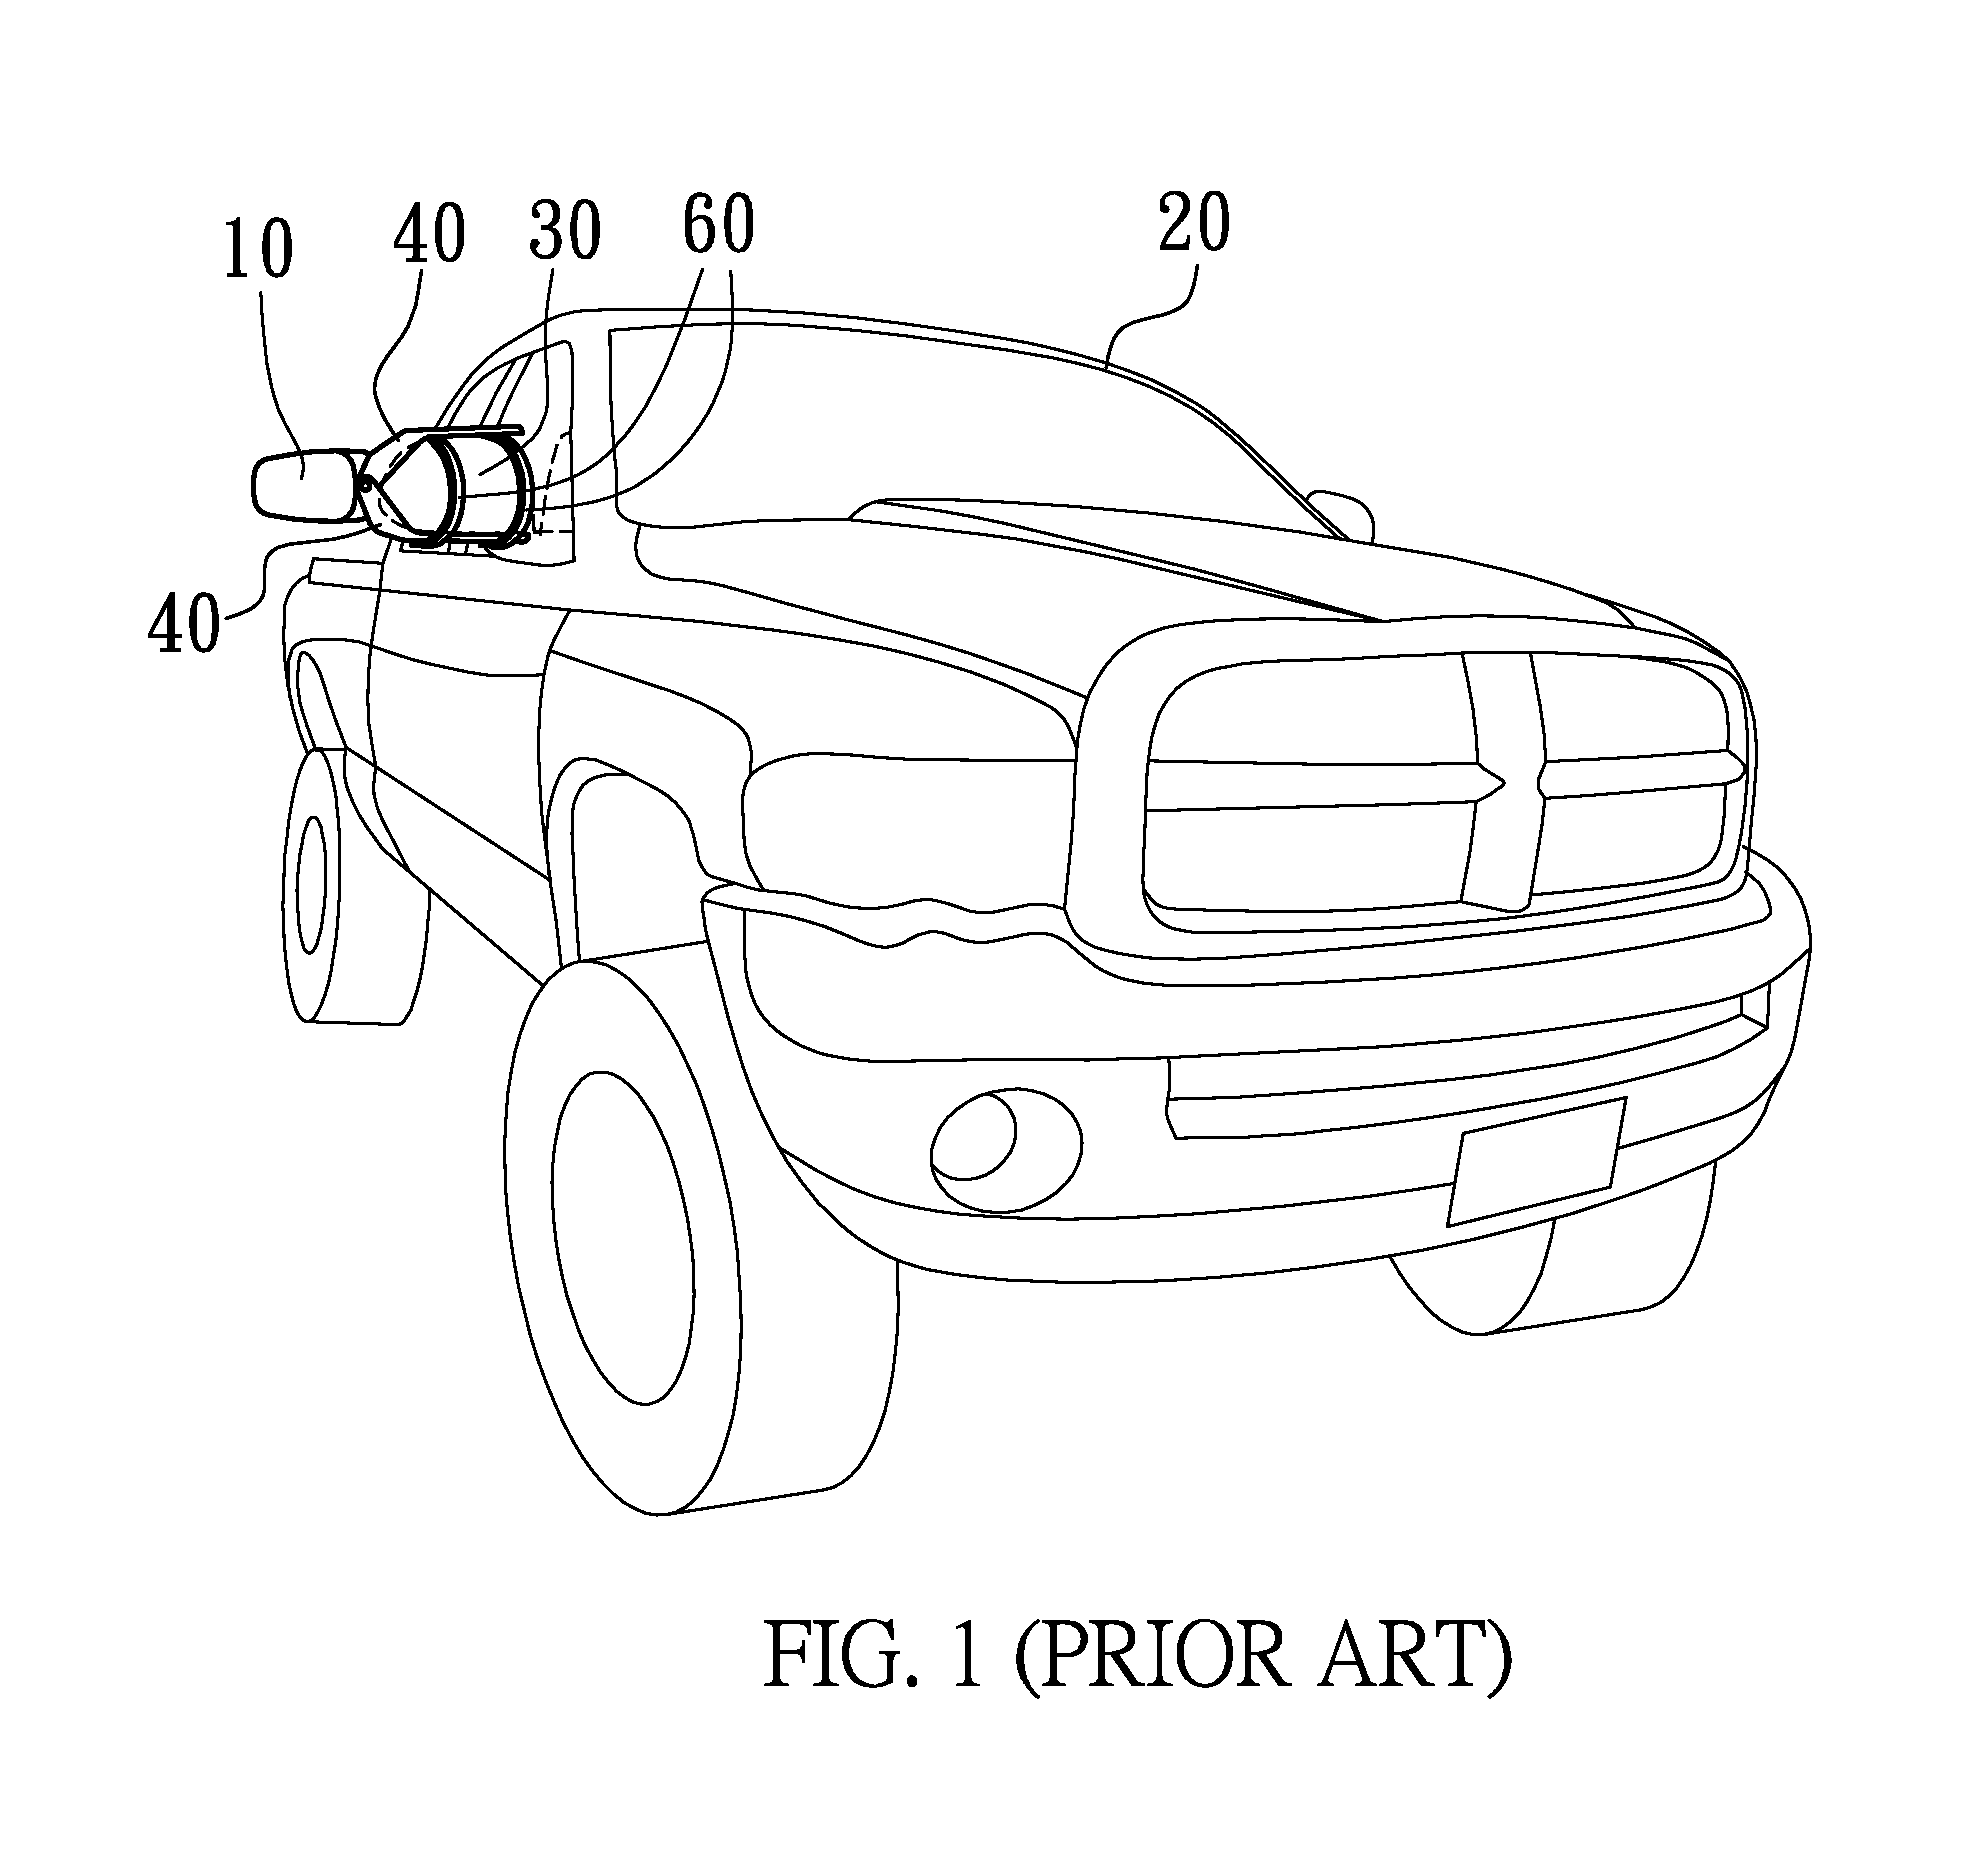 Auxiliary rearview mirror mounting structure